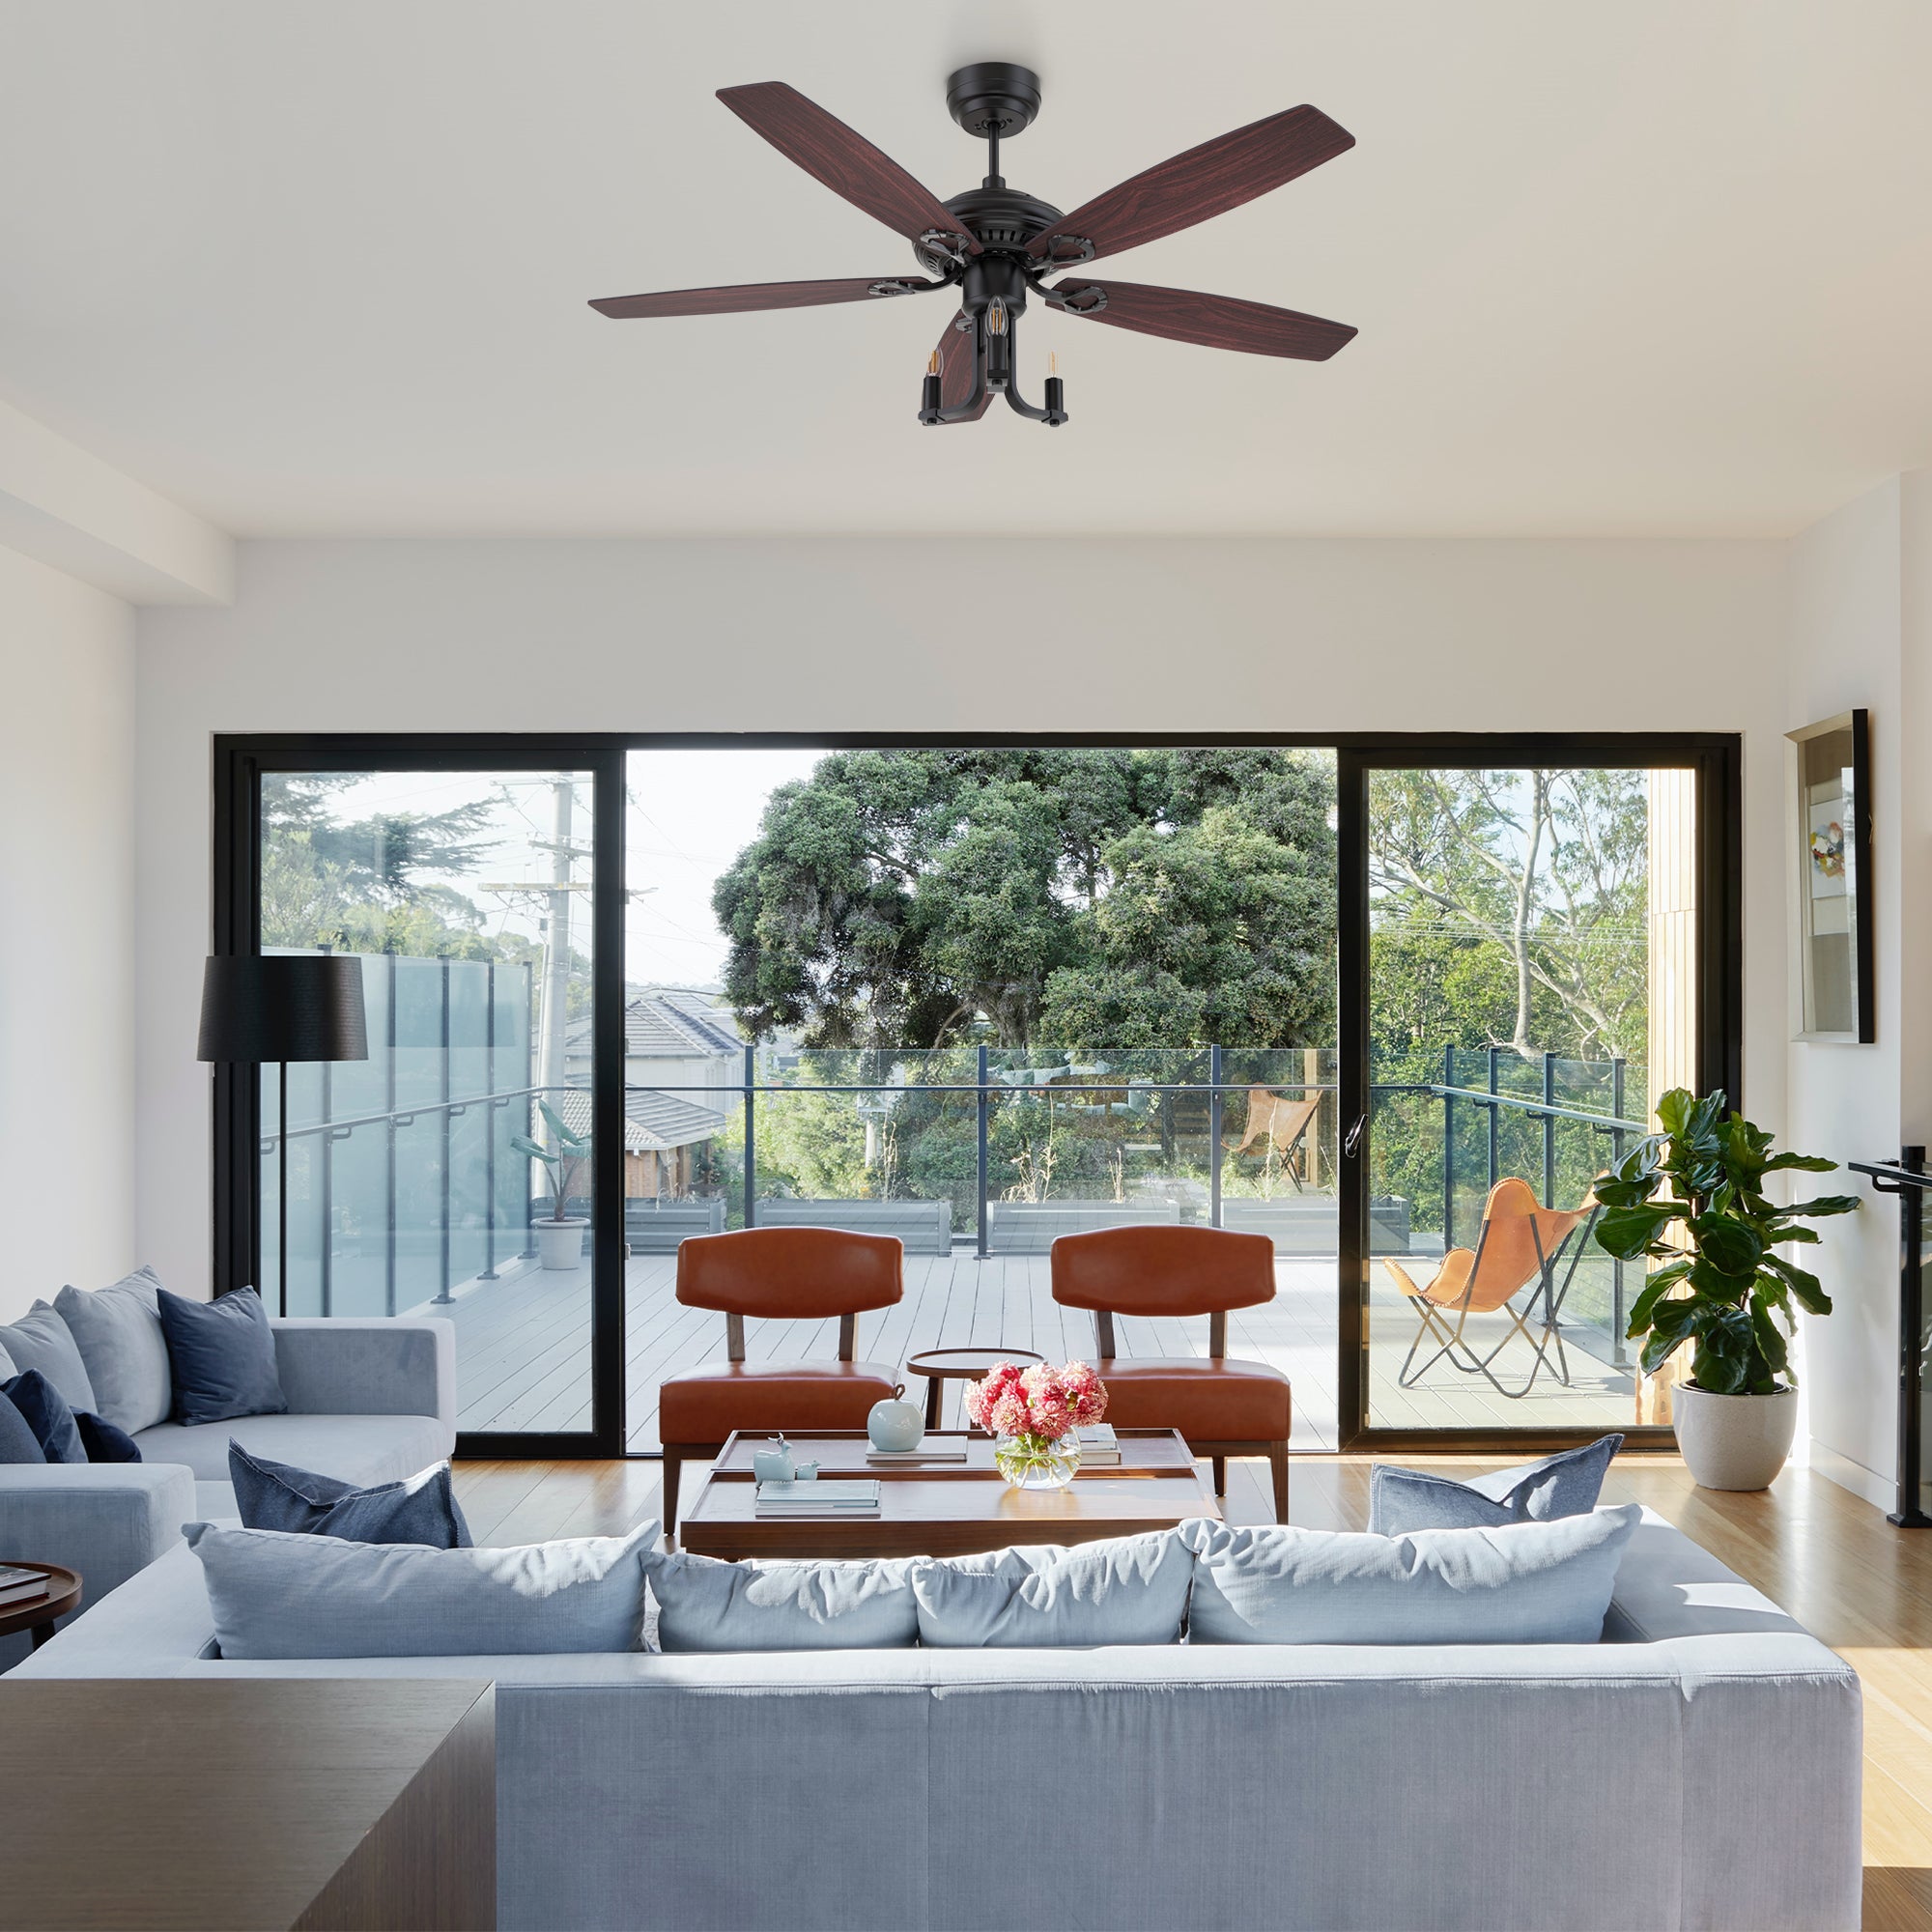 This Bryson 52&#39;&#39;ceiling fan keeps your space cool, bright, and stylish. It is a soft modern masterpiece perfect for your large indoor living spaces. This ceiling fan is a simplicity designing with black finish, use elegant Plywood blades and compatible with LED bulb(Not included). The fan features remote control. 